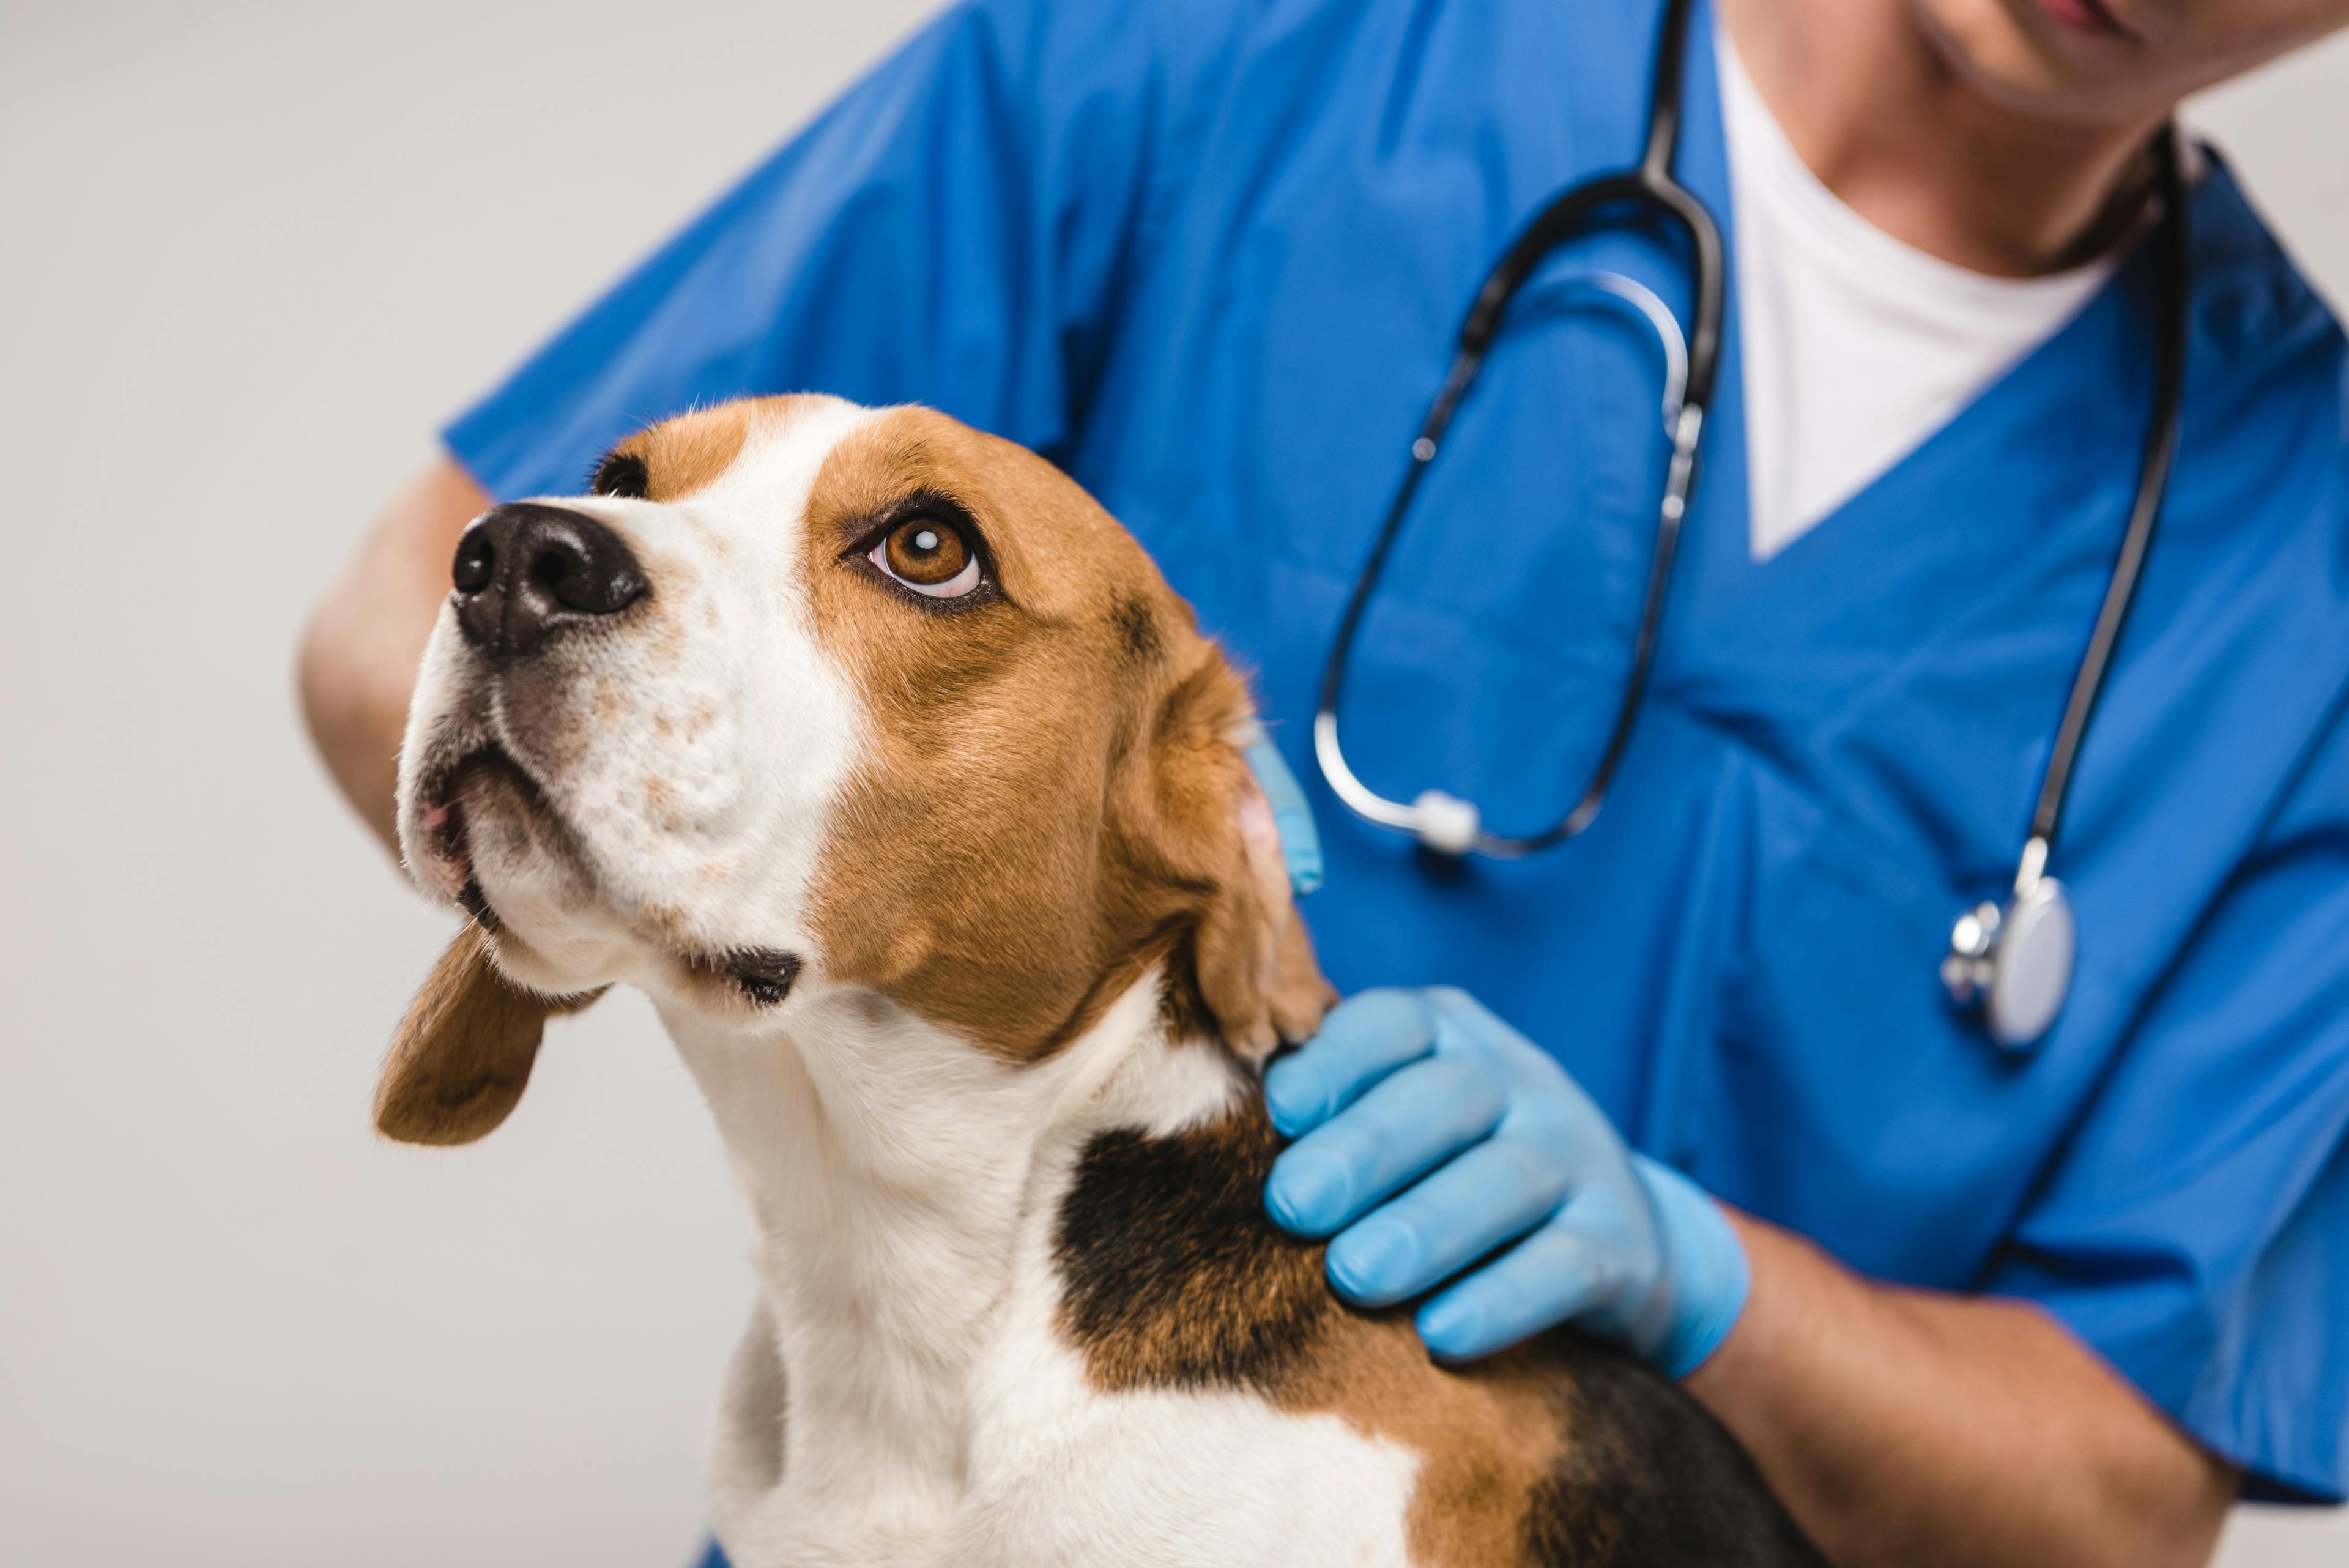 COVID-19 test for pets now available to veterinarians